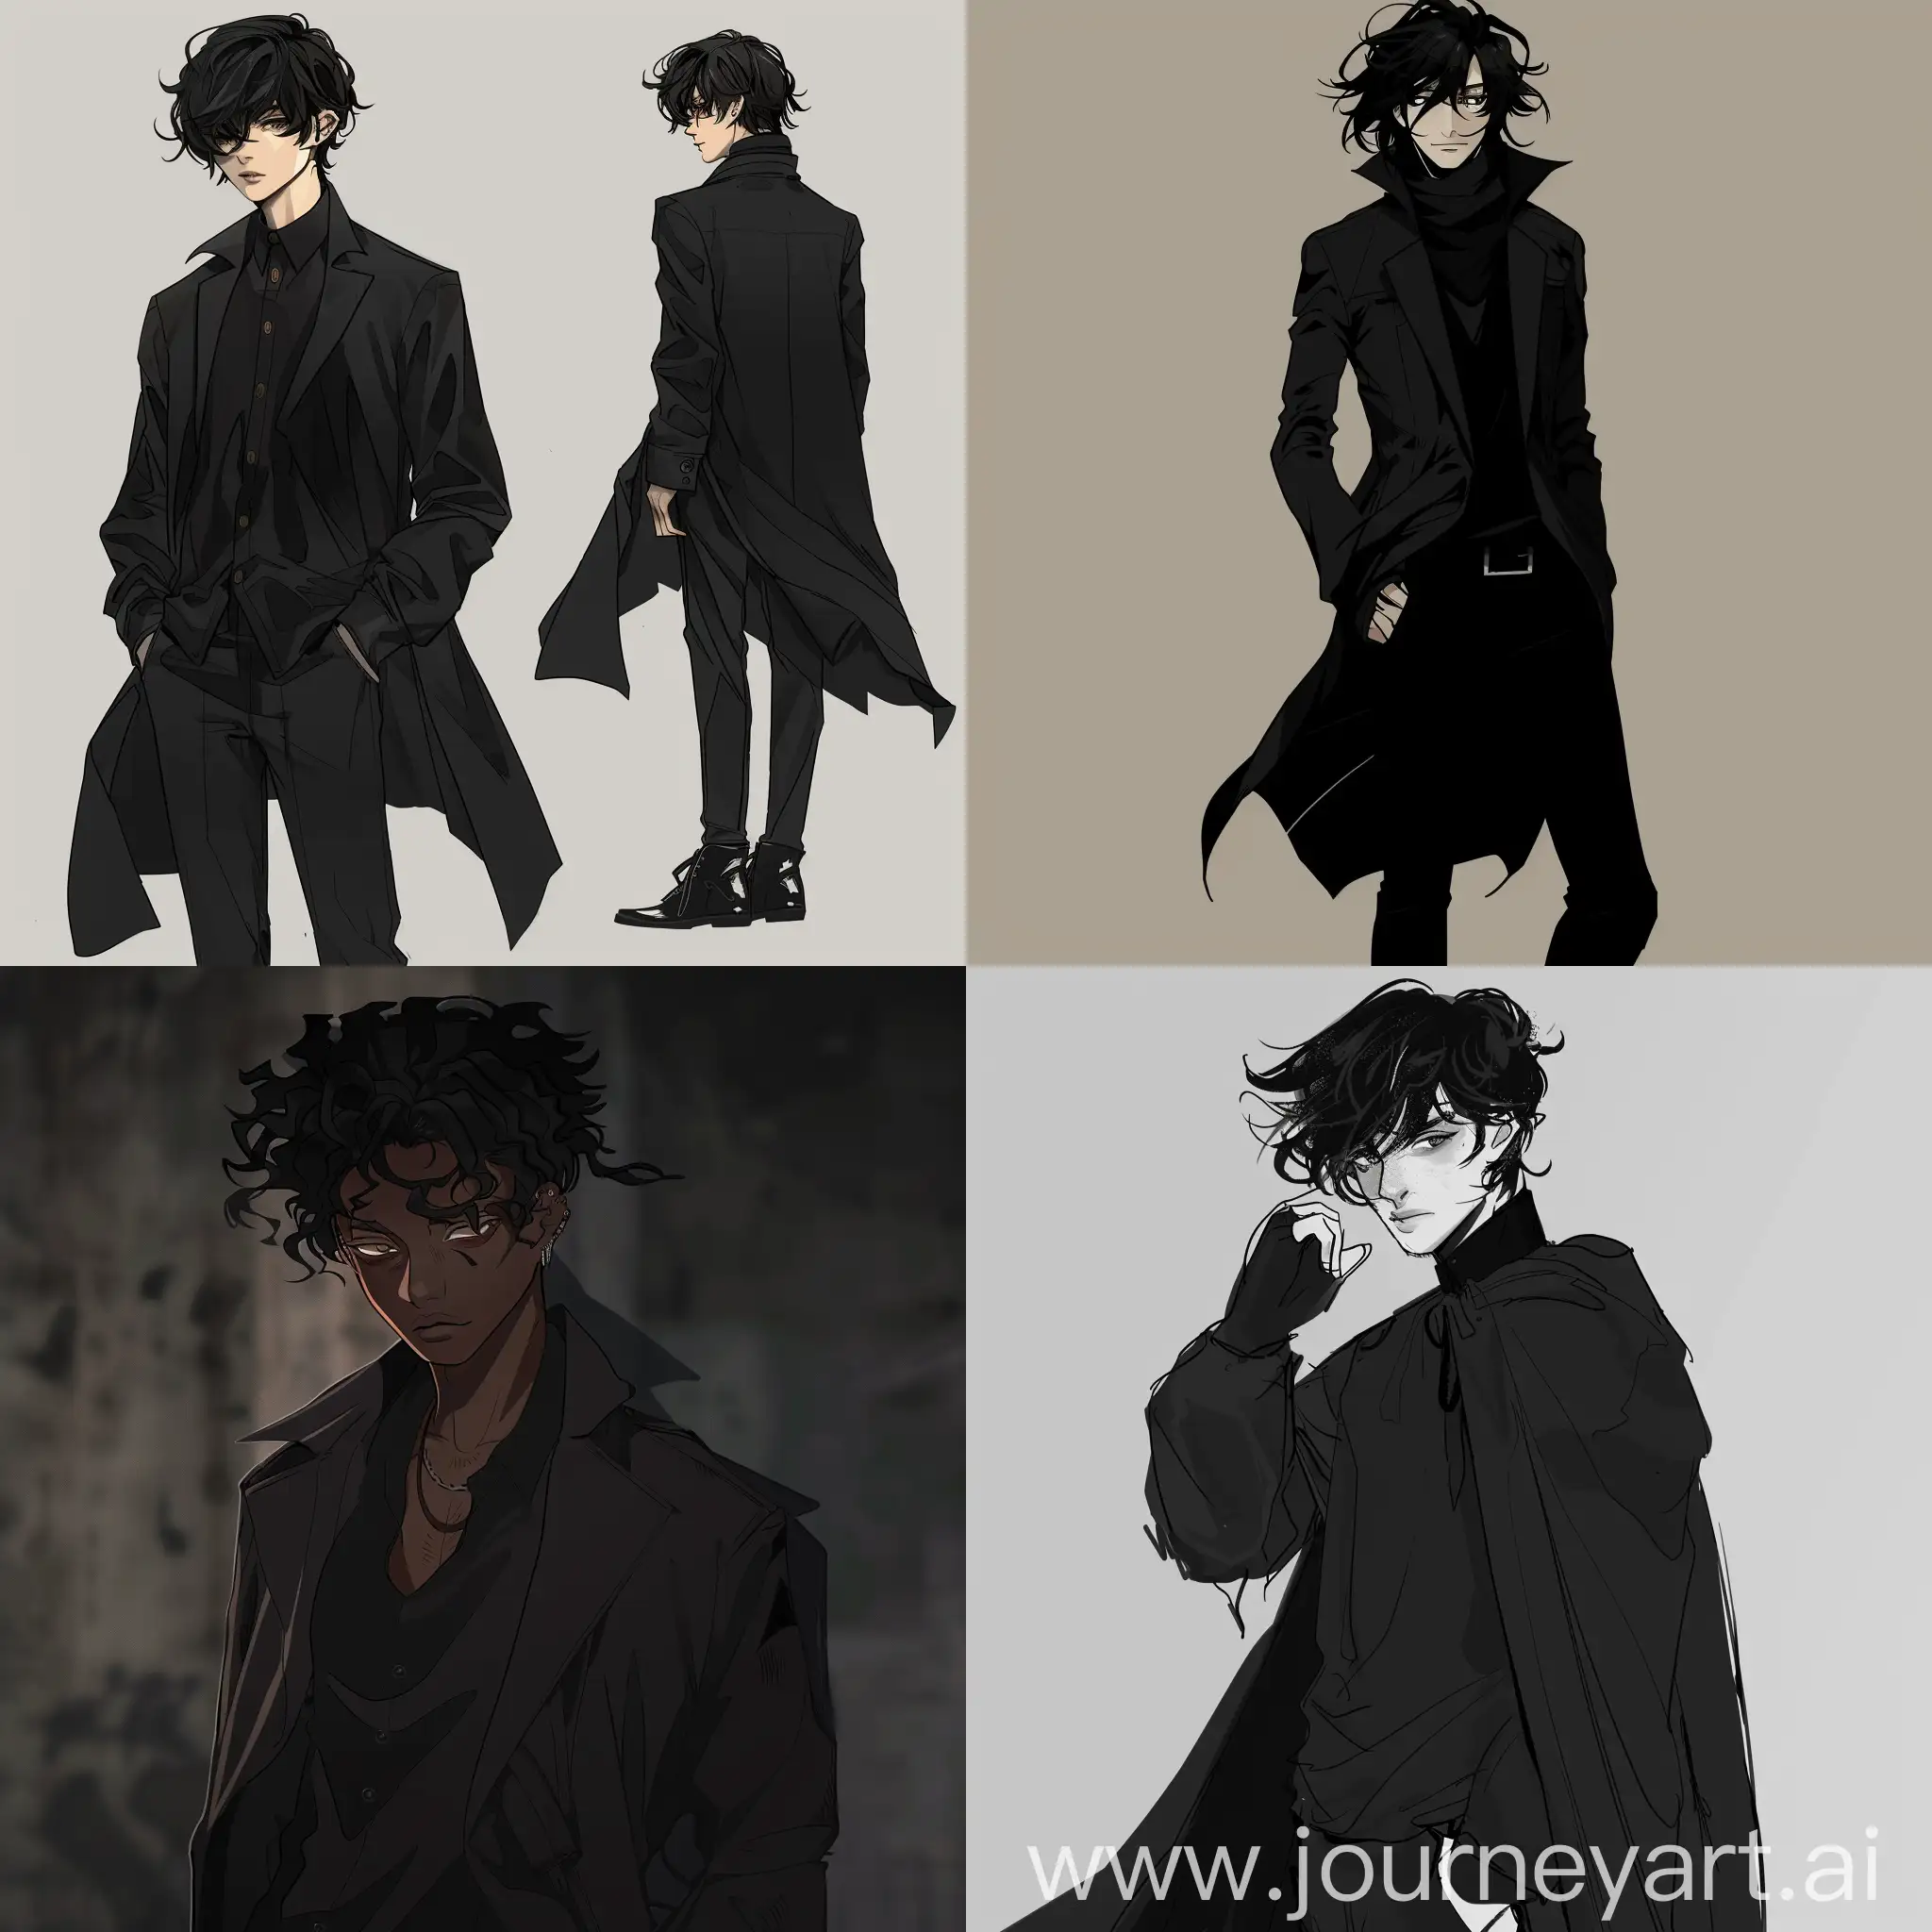 Anime OC reference. Name: Jan Adderley. Dressed in cool black clothes. Anime Style. Interesting Dark 